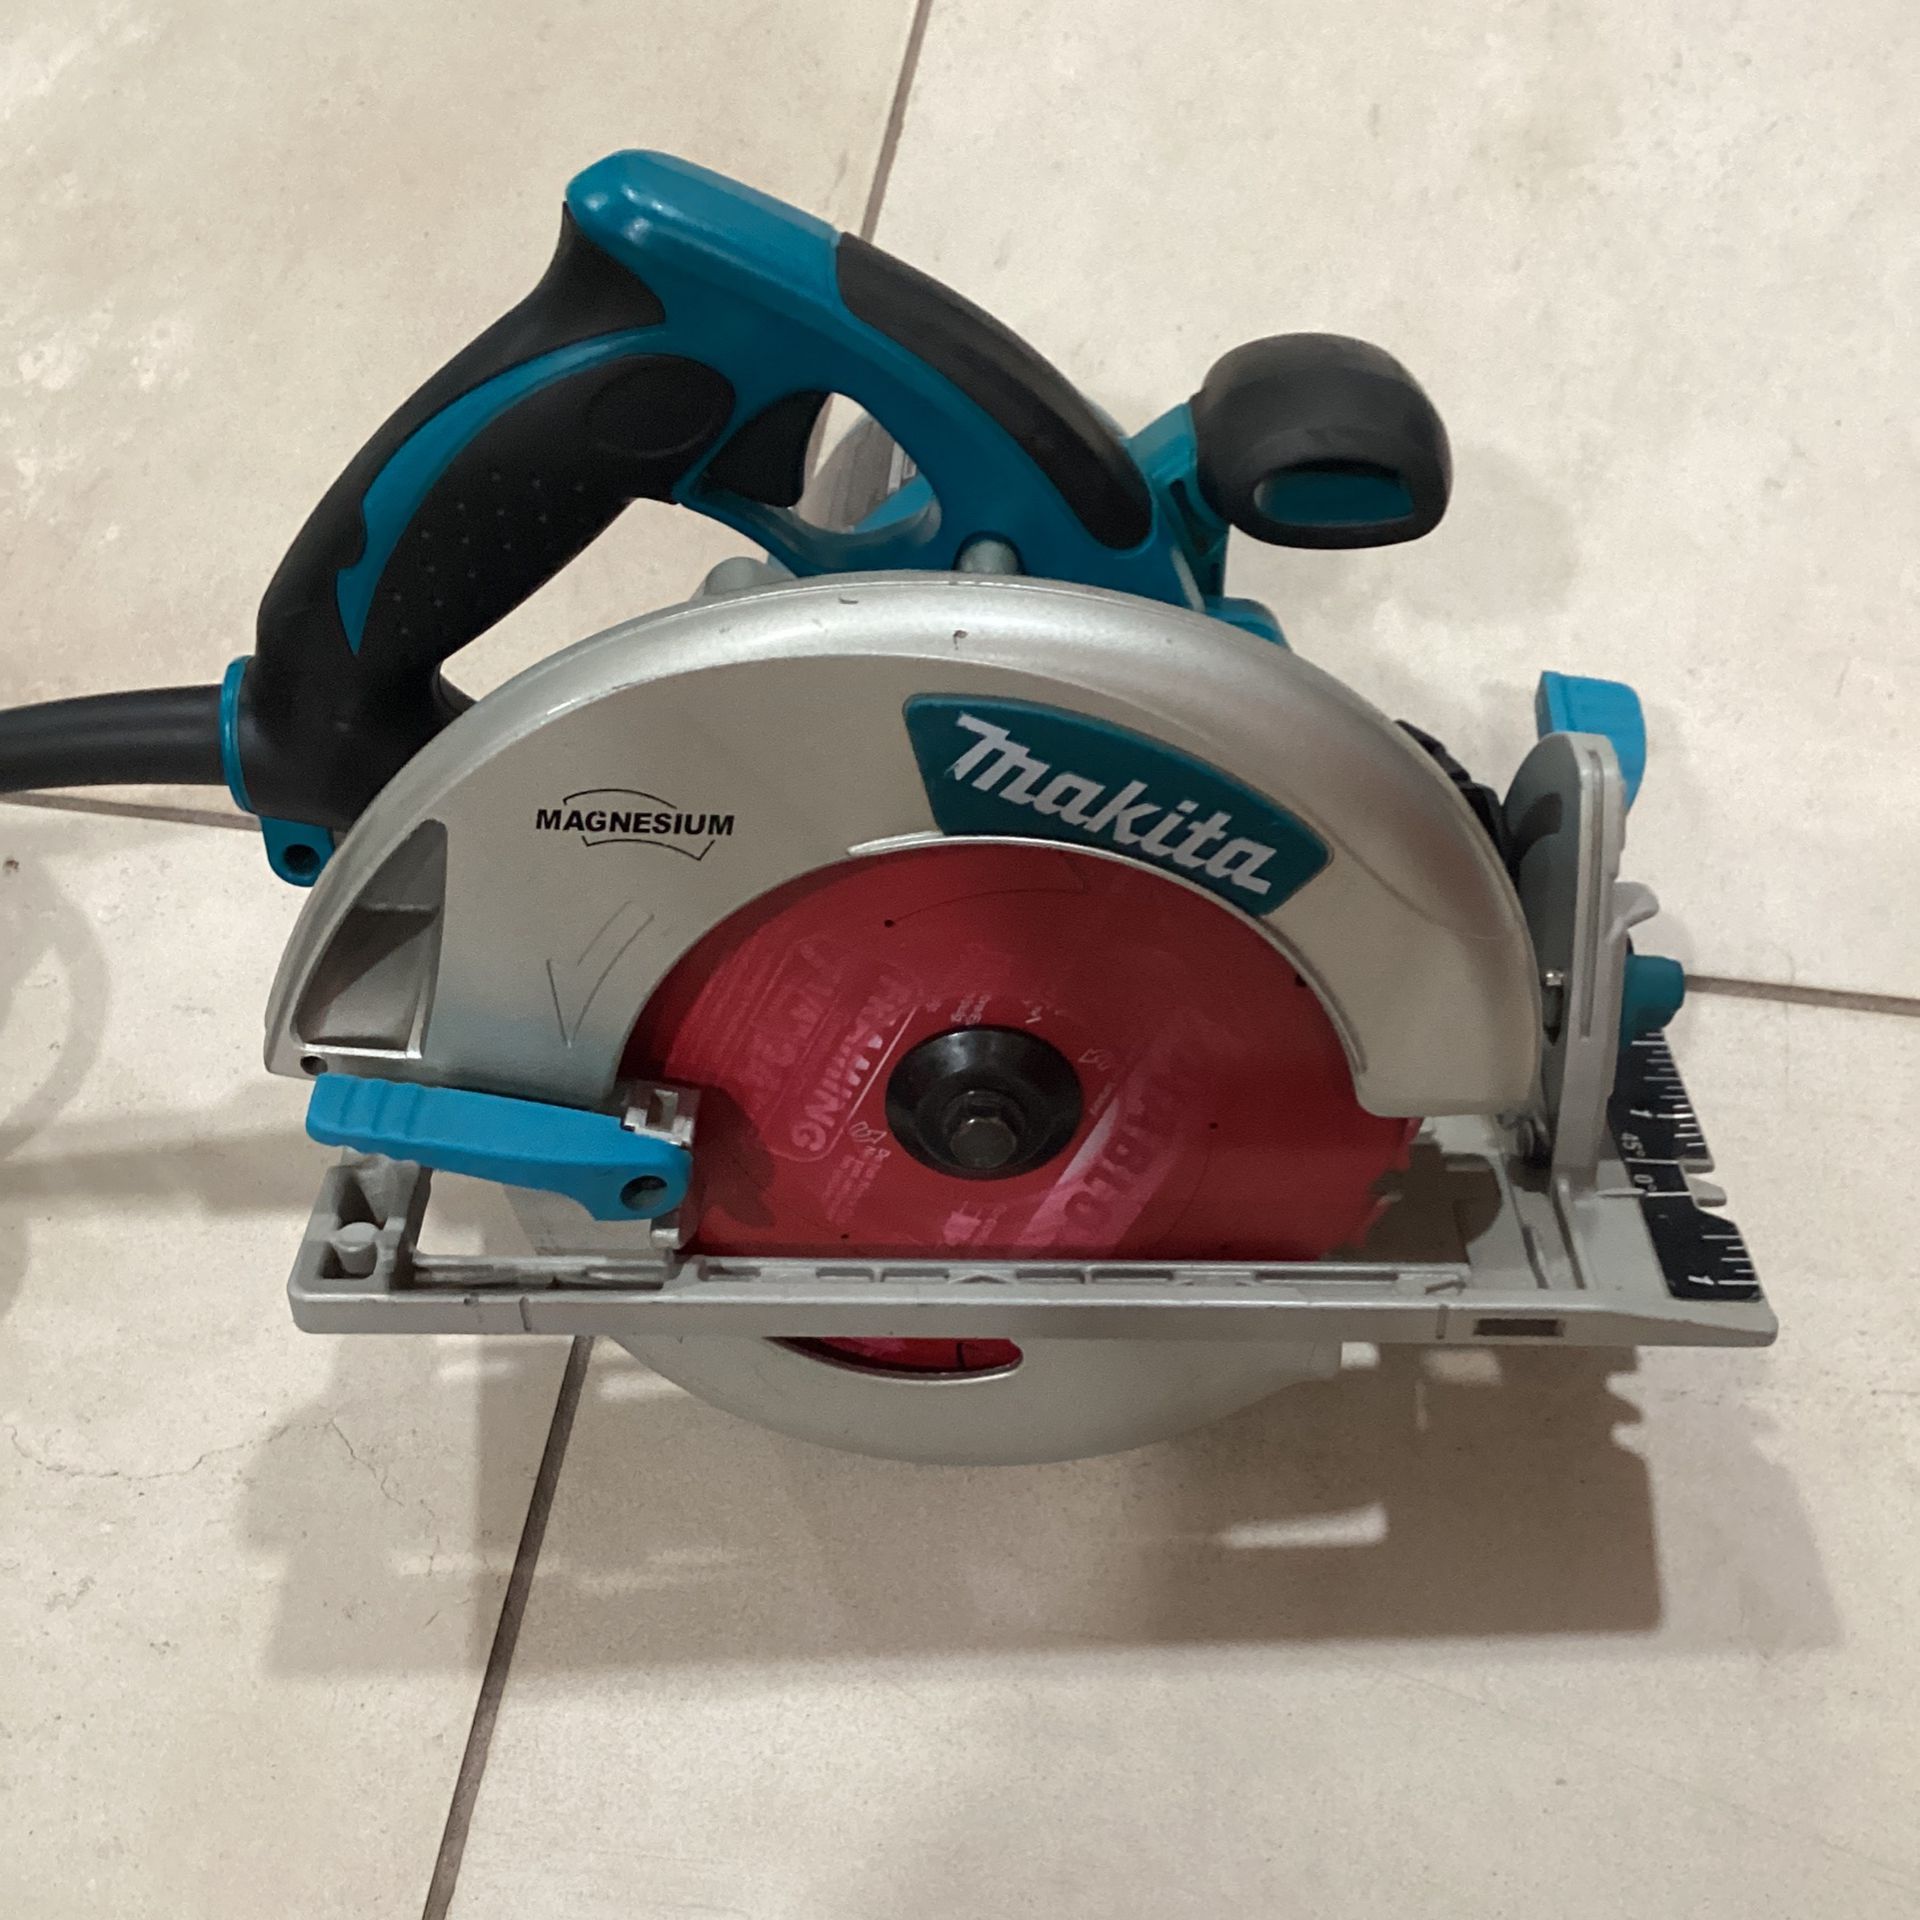 Makita 7- 1/4" Corded Lightweight Magnesium Circular Saw WithLED Light